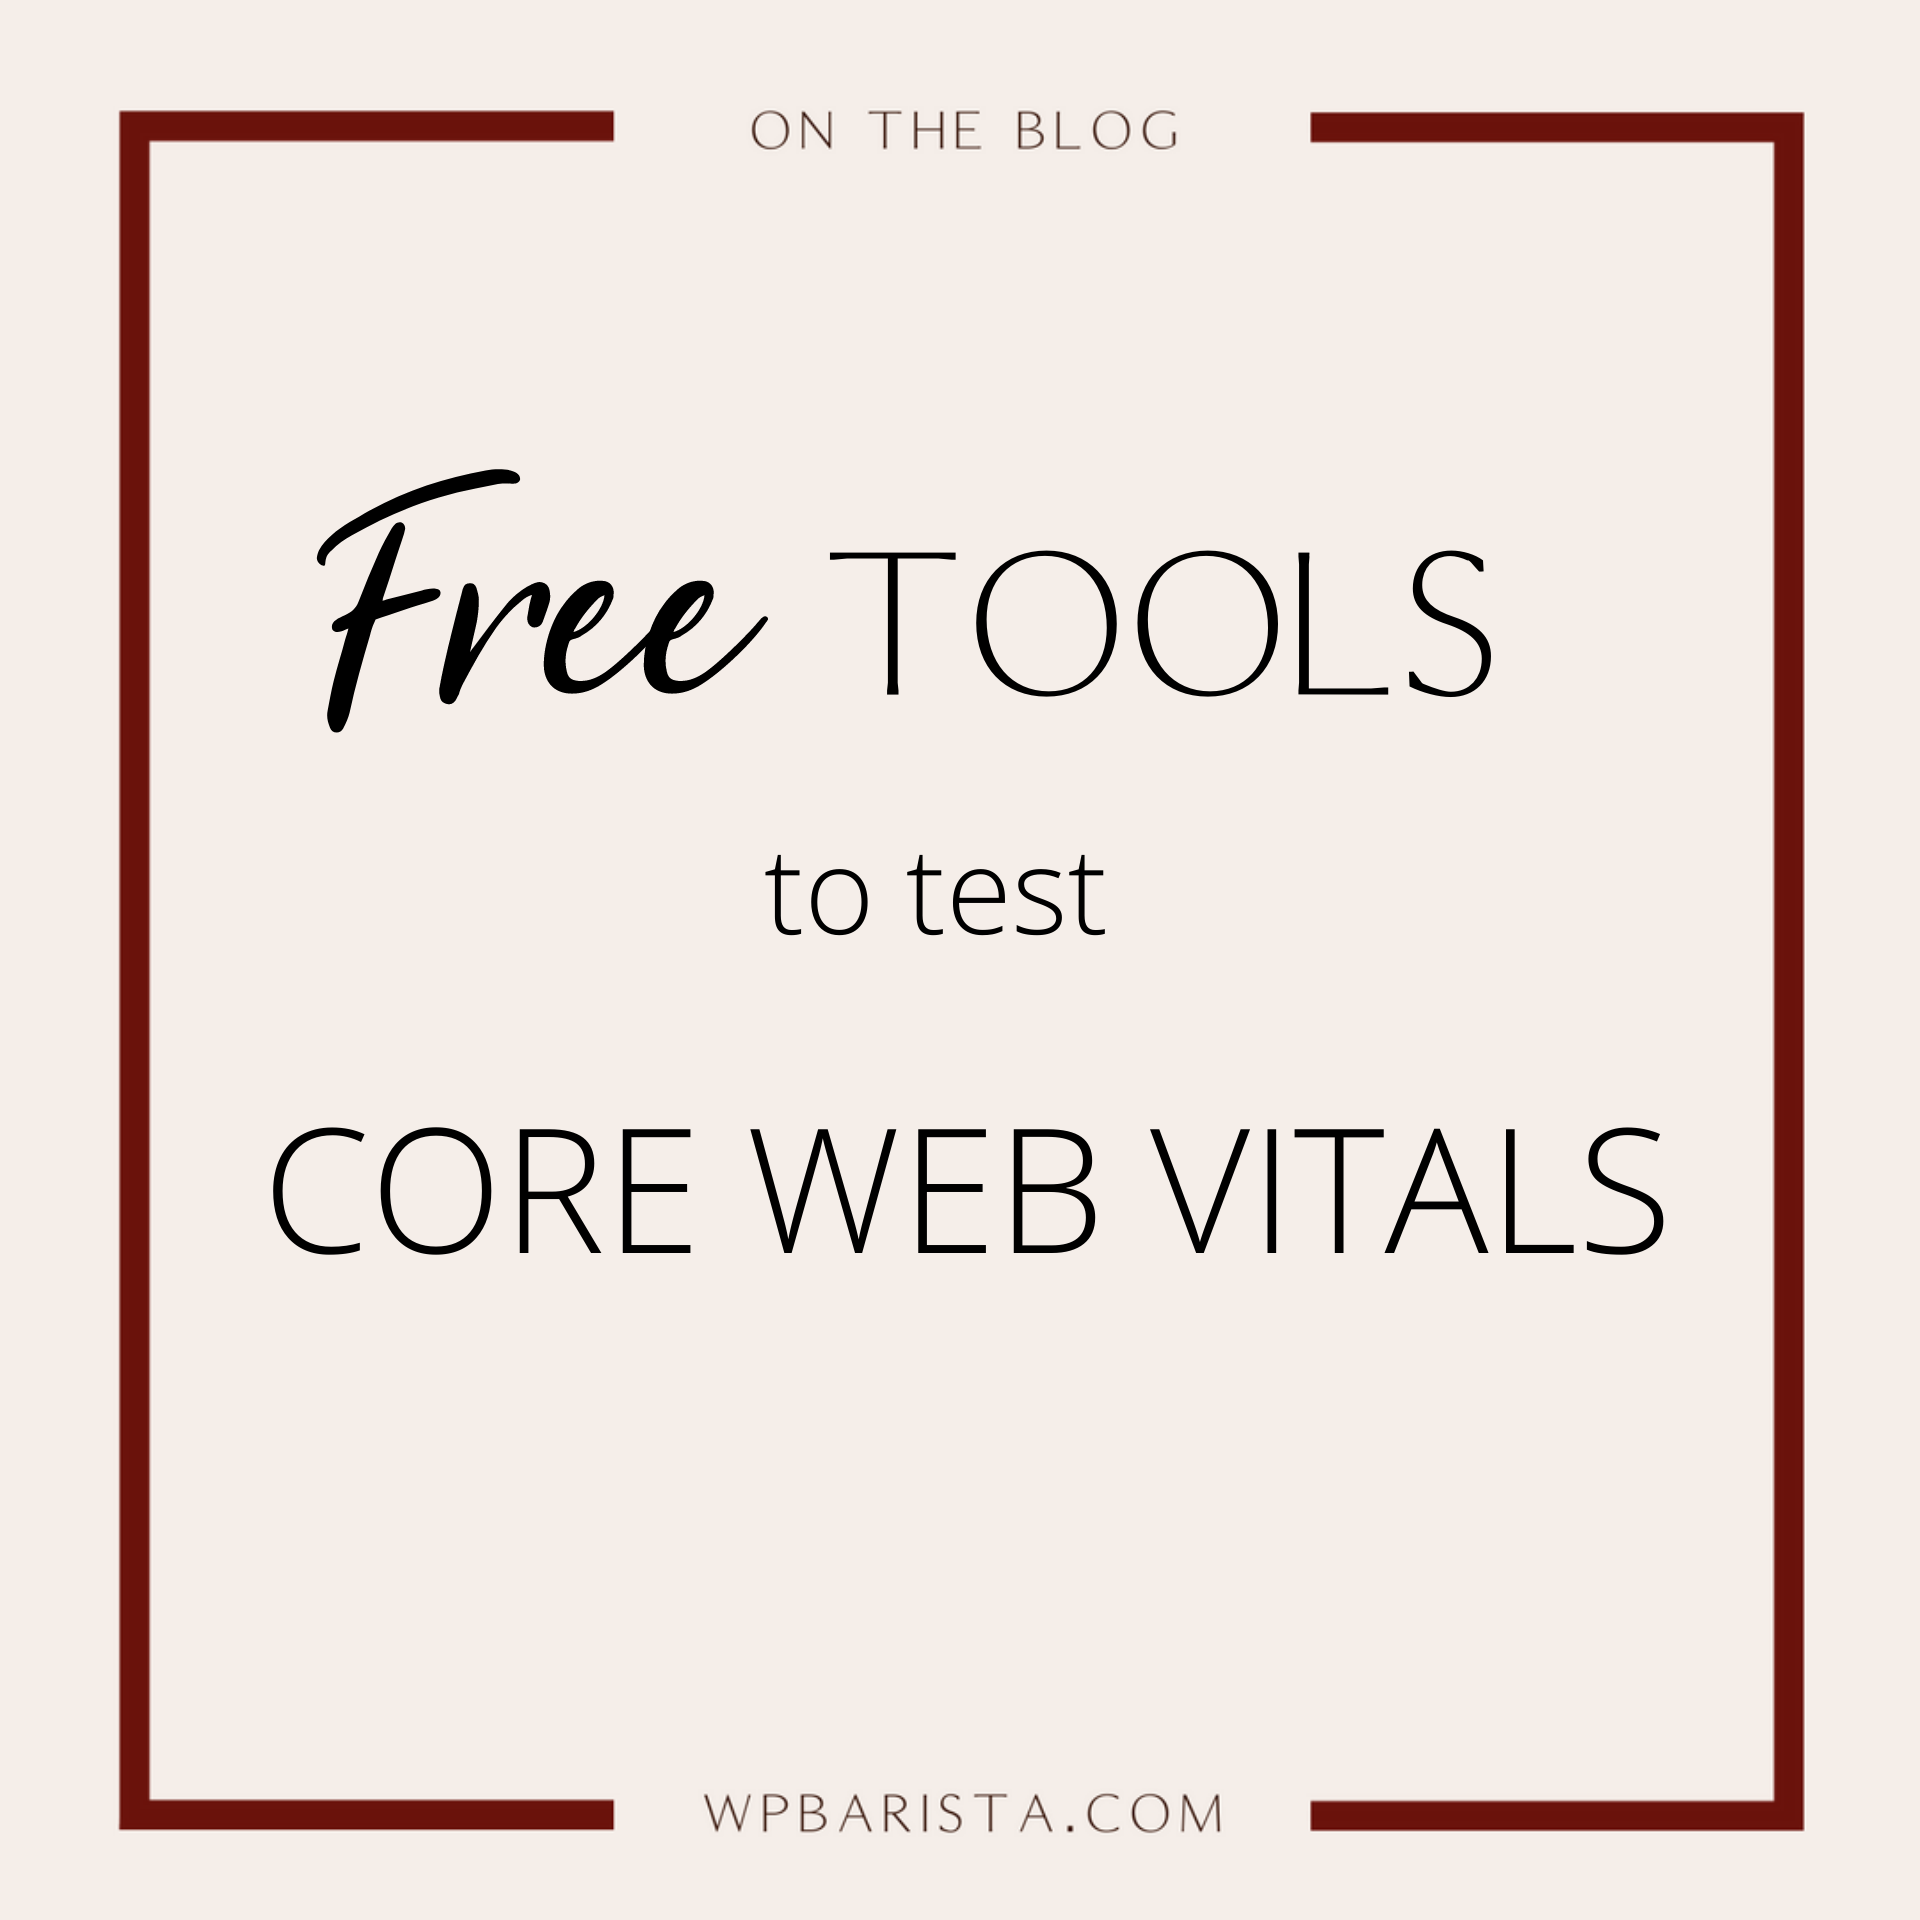 Free Tools to Test Core Web Vitals